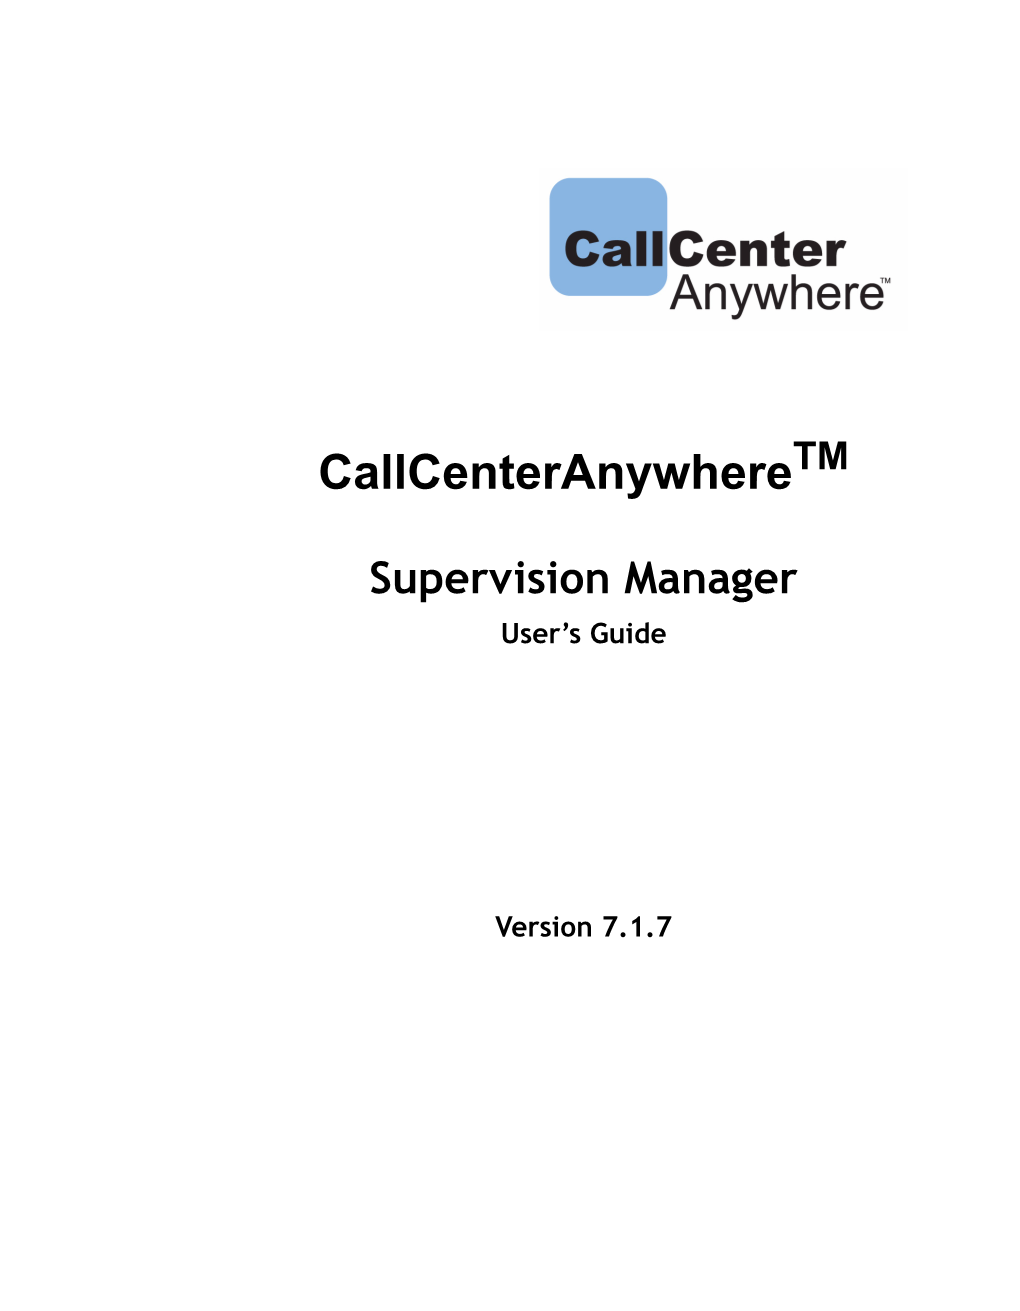 Callcenteranywhere Supervision Manager User's Guide